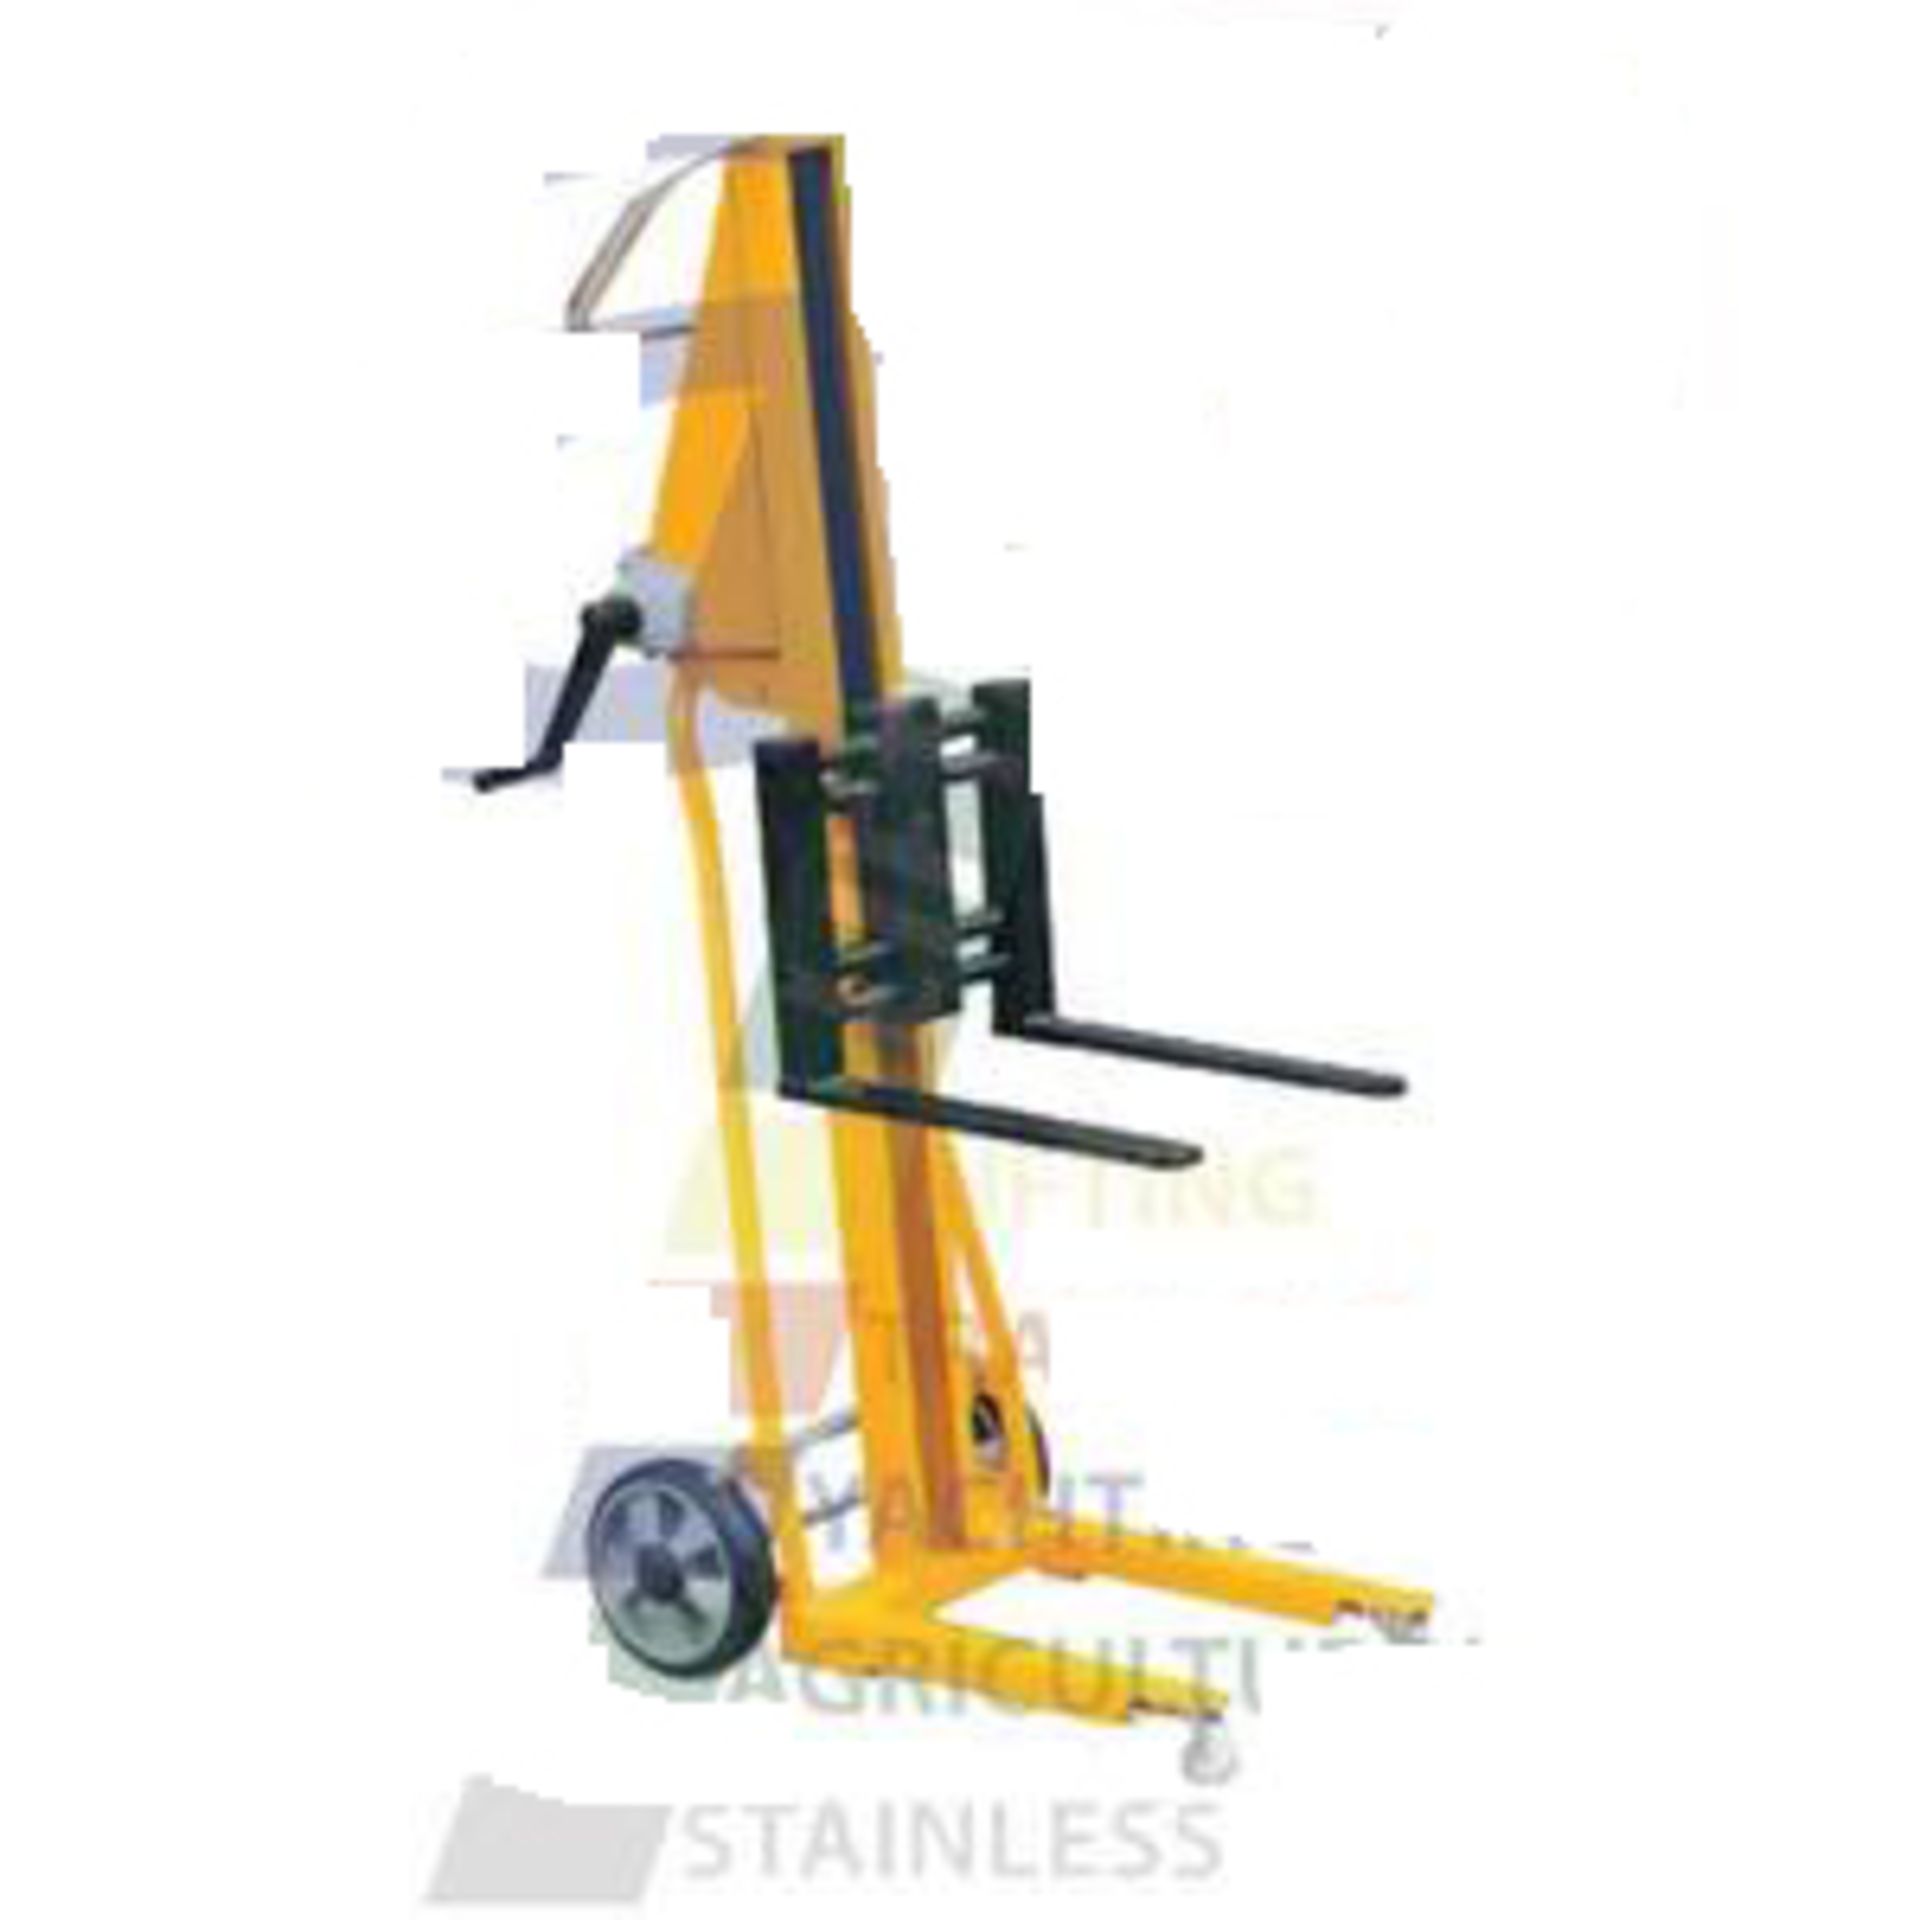 1 X 120KG X 1050MM LIFTING HEIGHT MINI STACKER - BRAND NEW
Lightweight design, very easy to